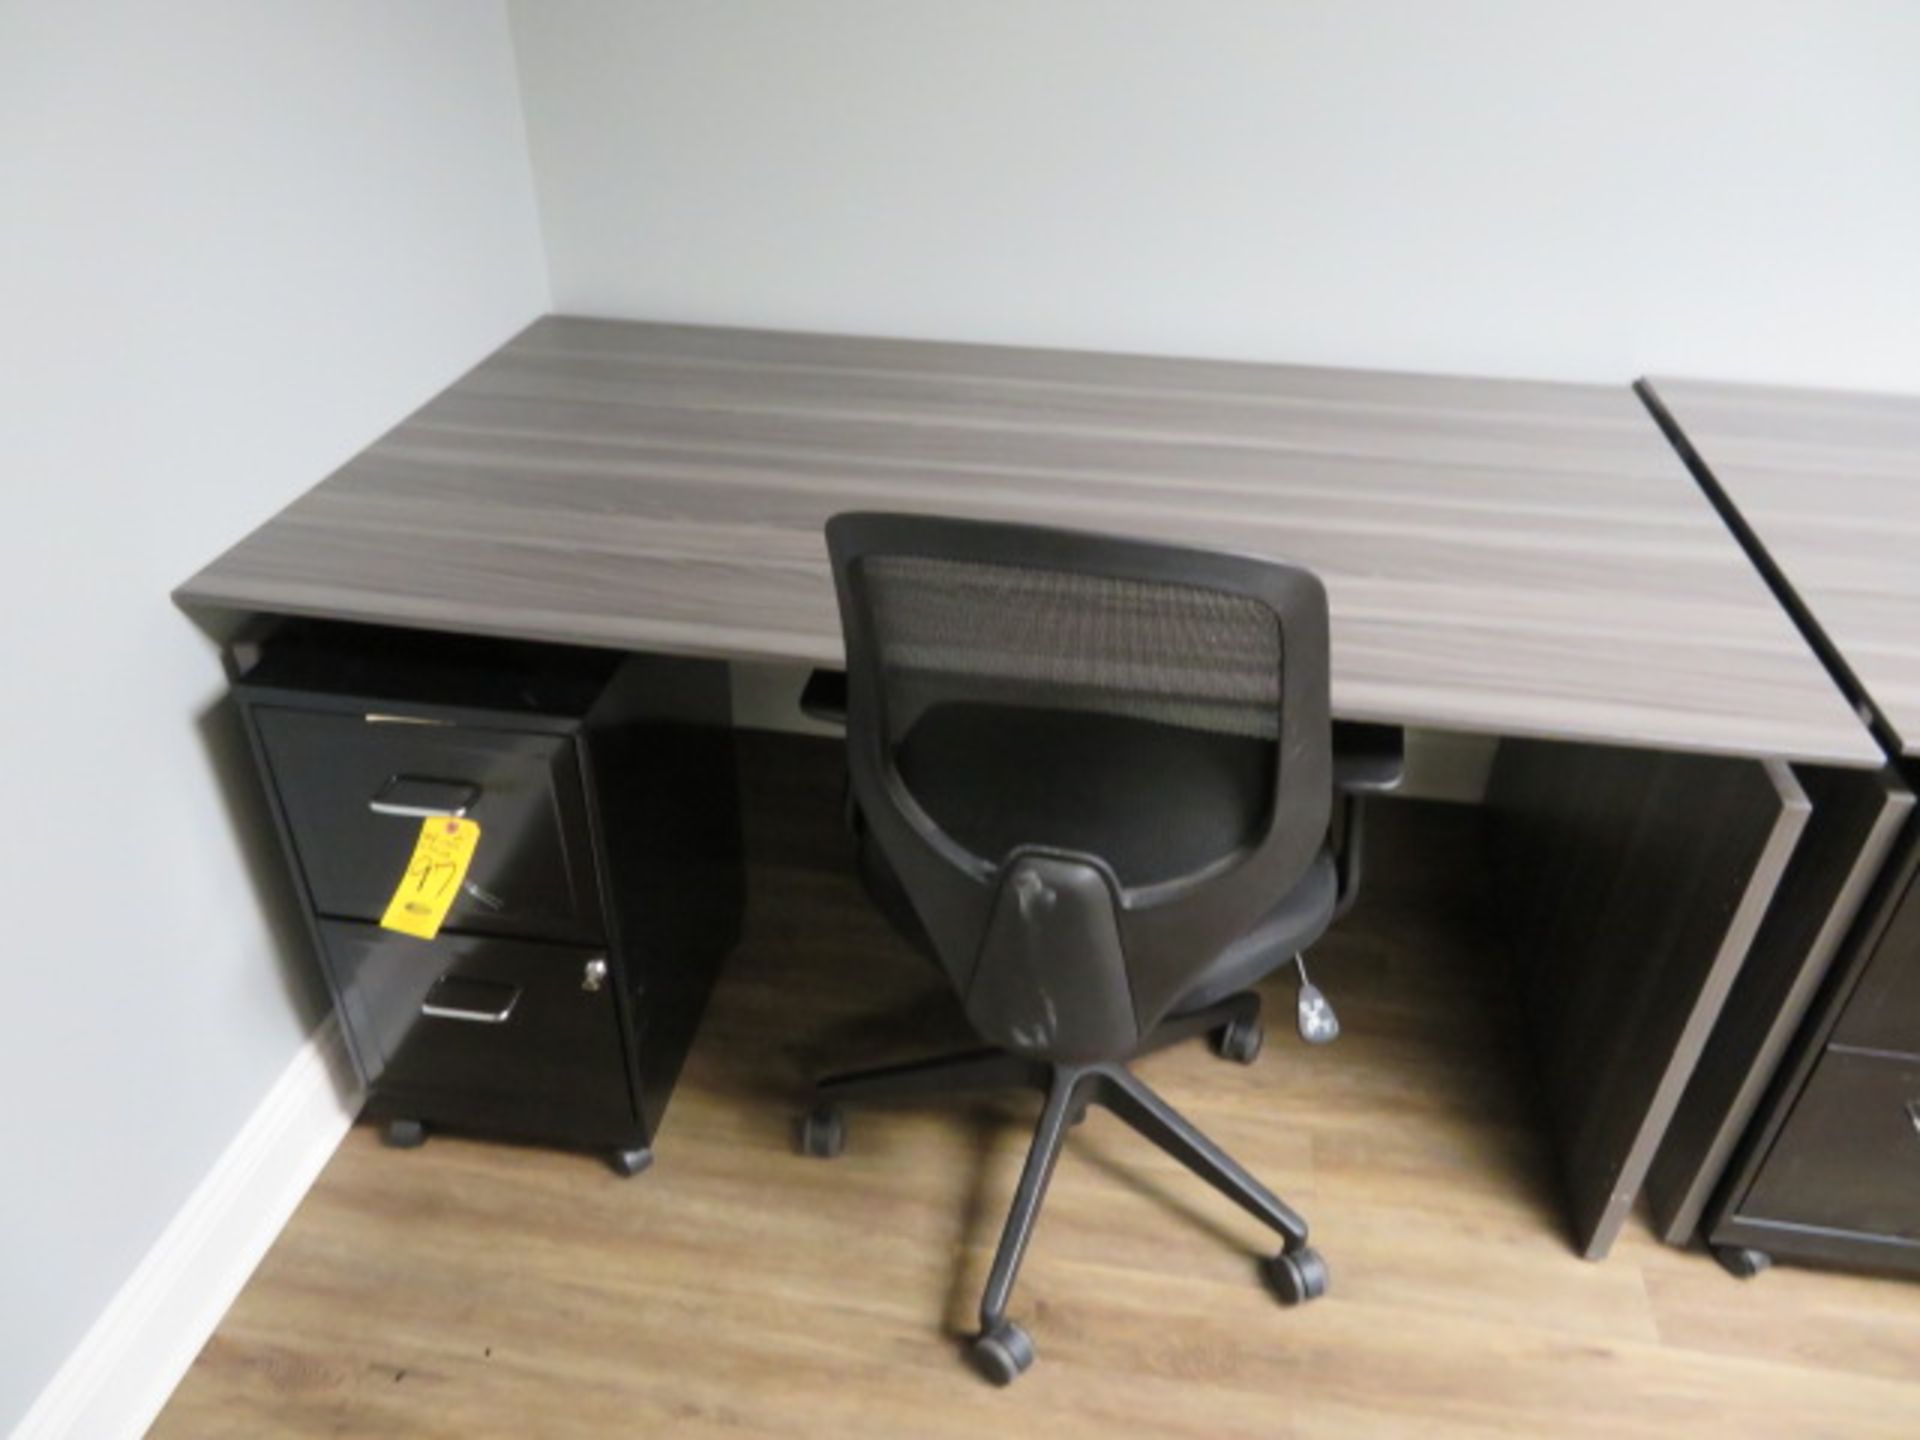 36 IN X 63 IN GRAY LAMINATE DESK WITH MODESTY PANEL, TASK MANAGEMENT CHAIR AND 2-DR BOX FILE